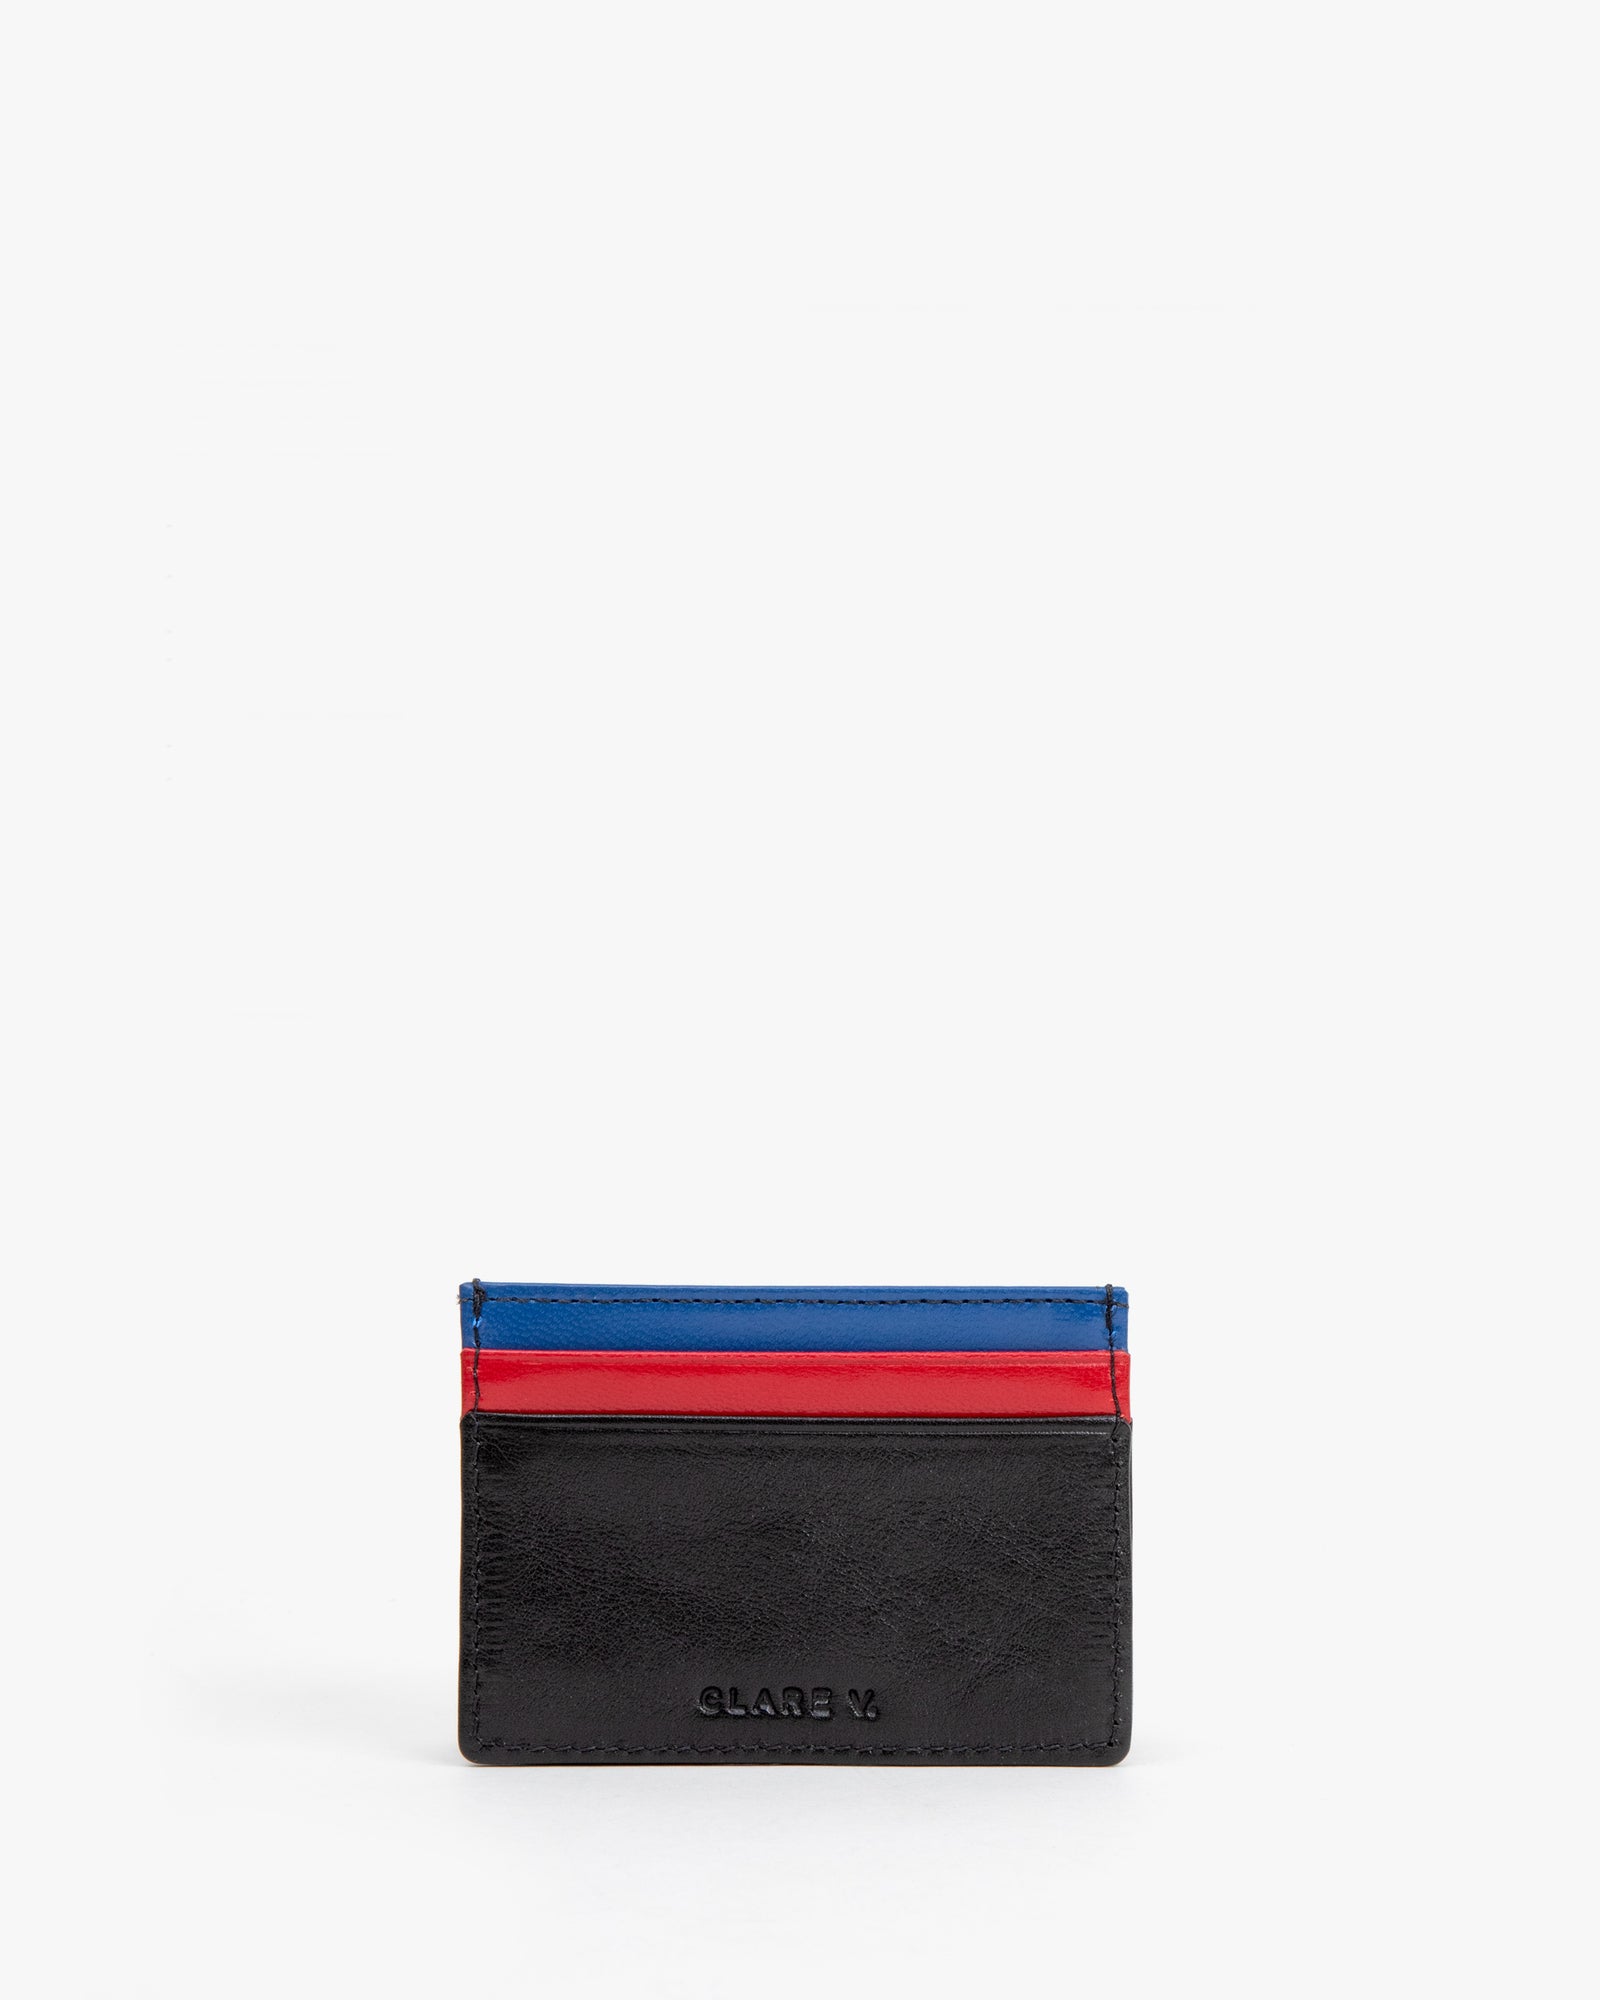 Back of the Black Adams's Card Case with Red & Blue Card Slots, Showing the Clare V. Embossing 